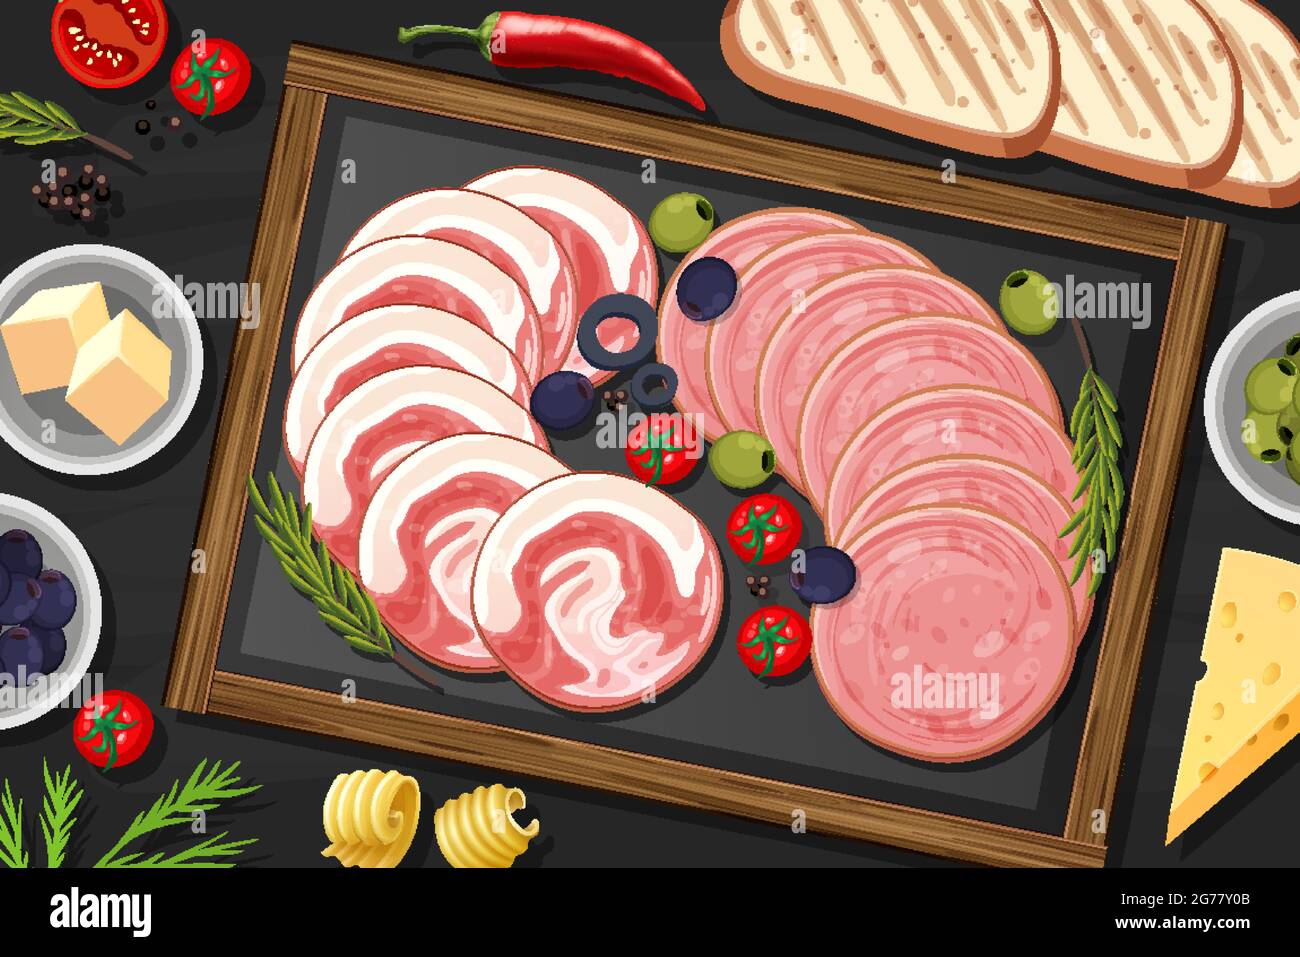 Platter of cold meats and smoked meats on the table background illustration Stock Vector